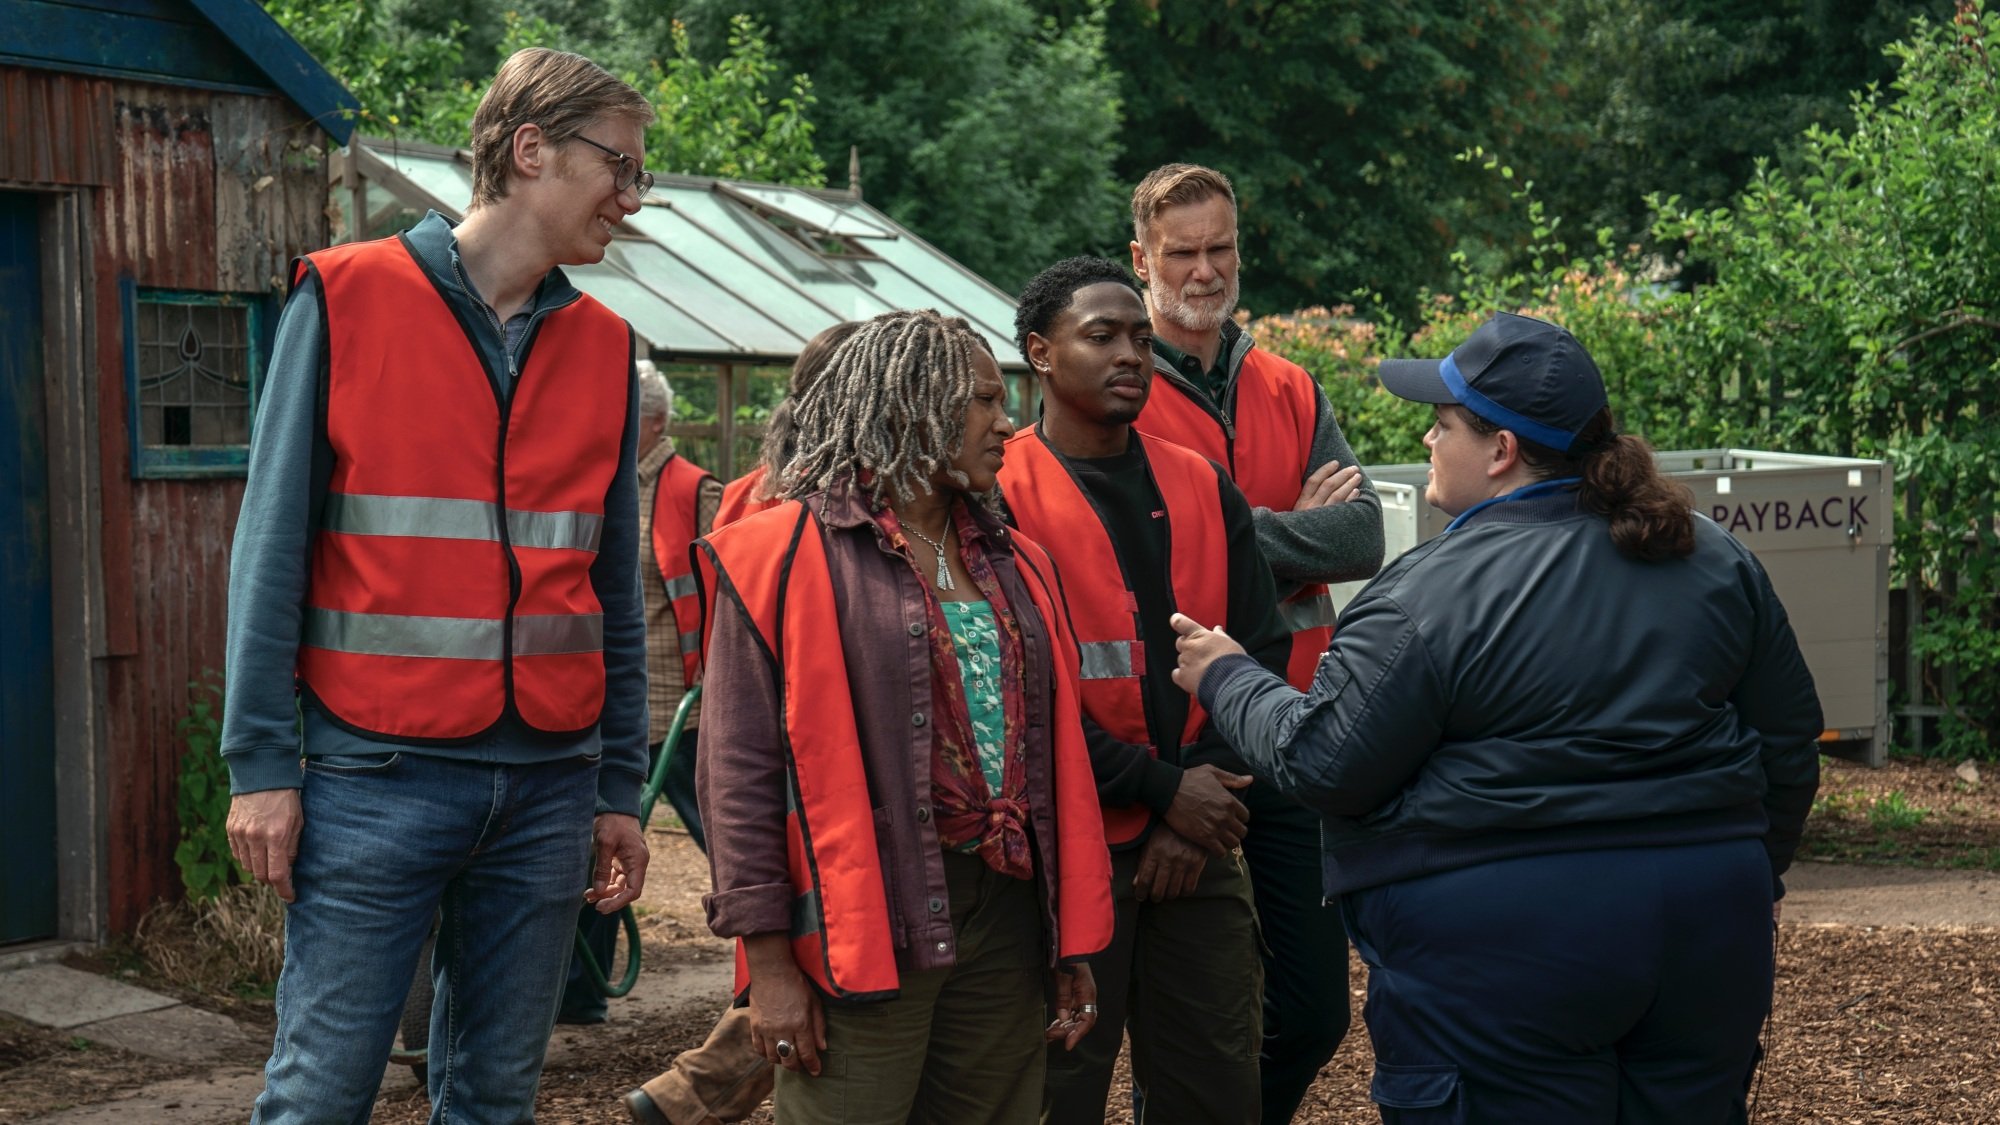 A group of men and women in red vests outside a community garden.